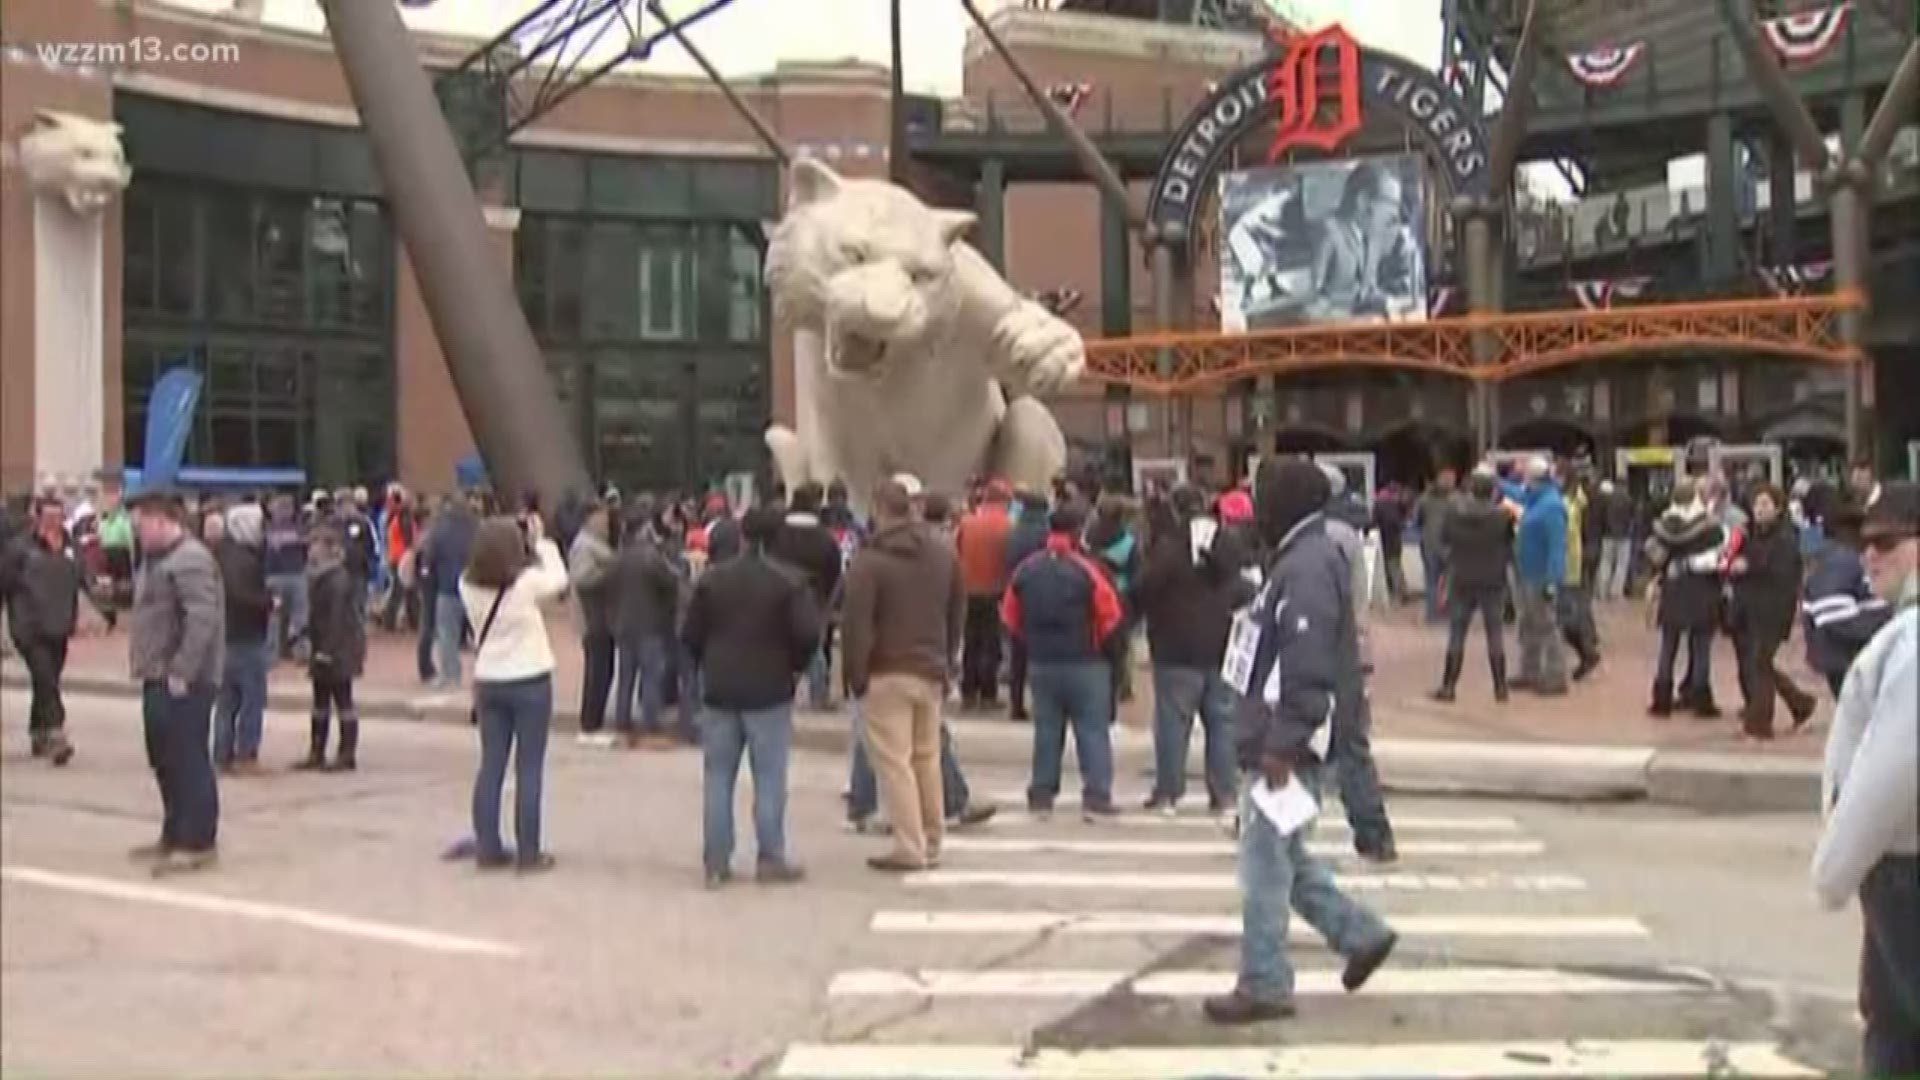 Take 2: Opening Day in Detroit at Comerica Park